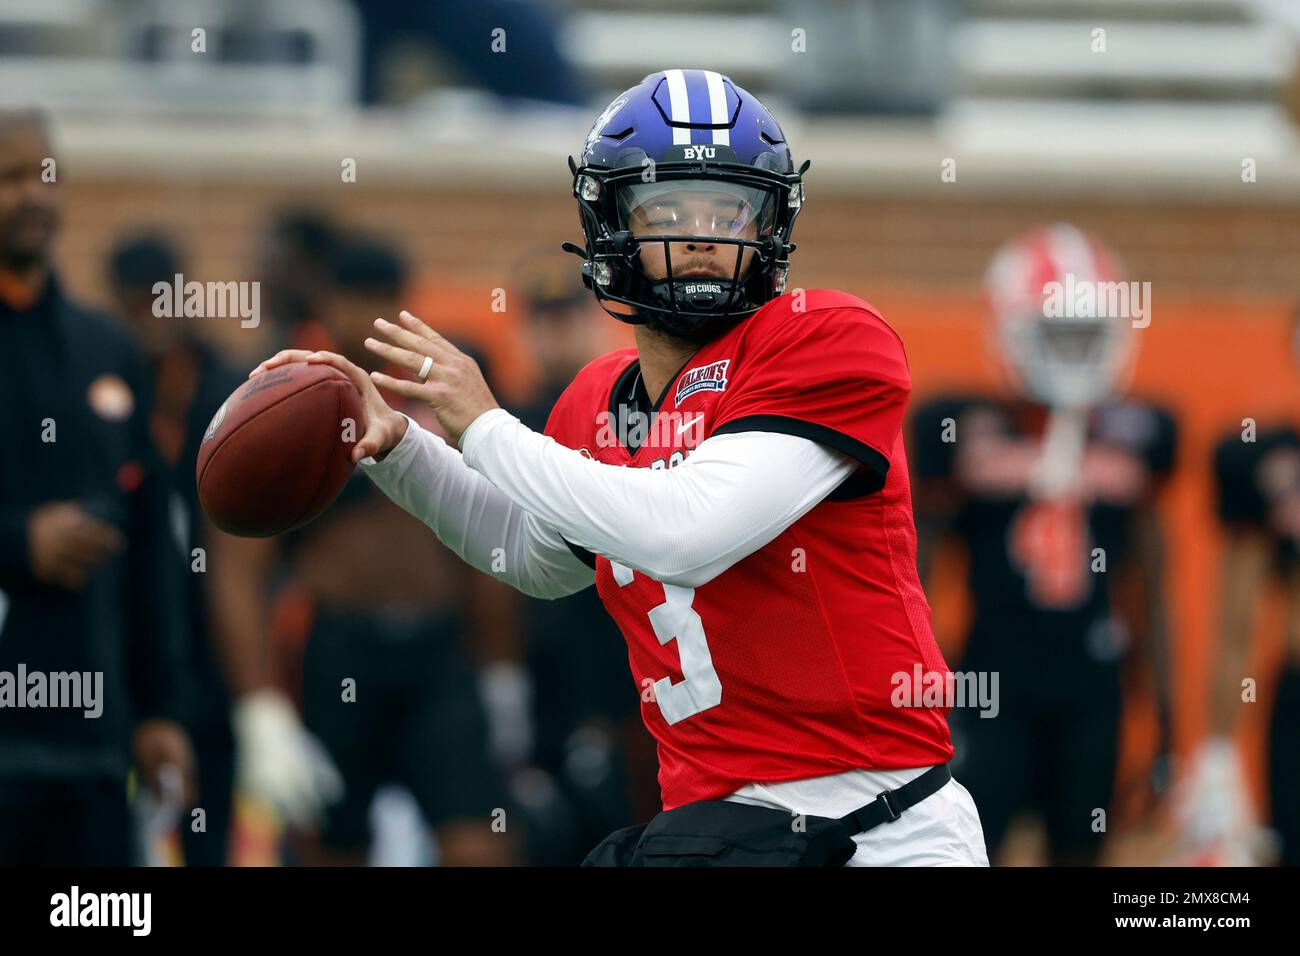 National quarterback Jaren Hall of BYU throws a pass during practice for the Senior Bowl NCAA